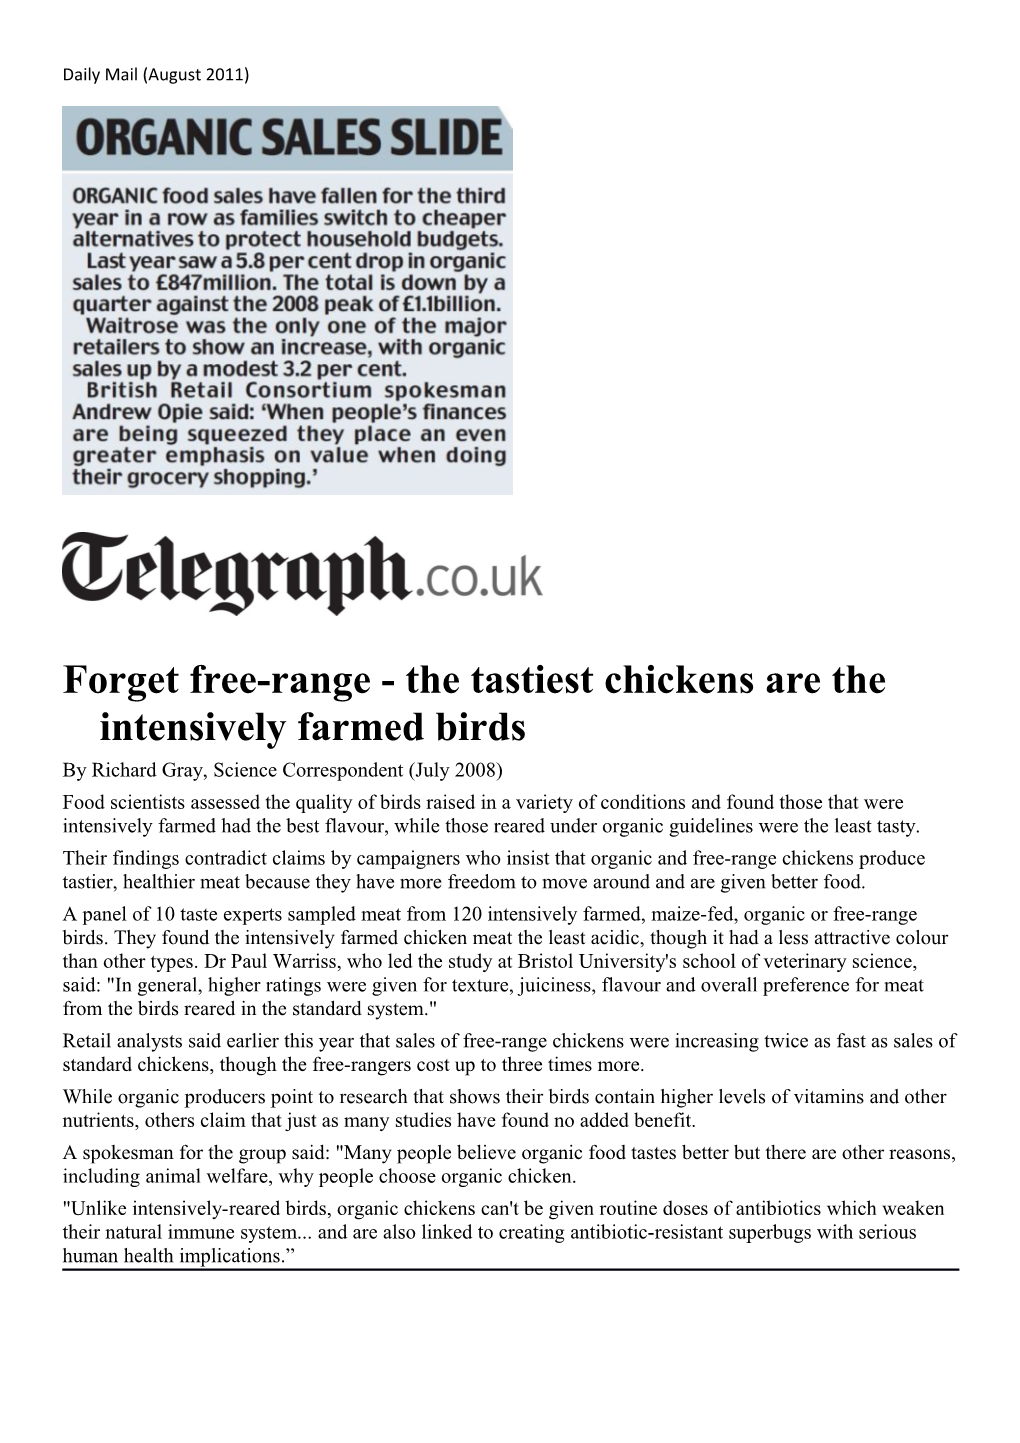 Forget Free-Range - the Tastiest Chickens Are the Intensively Farmed Birds